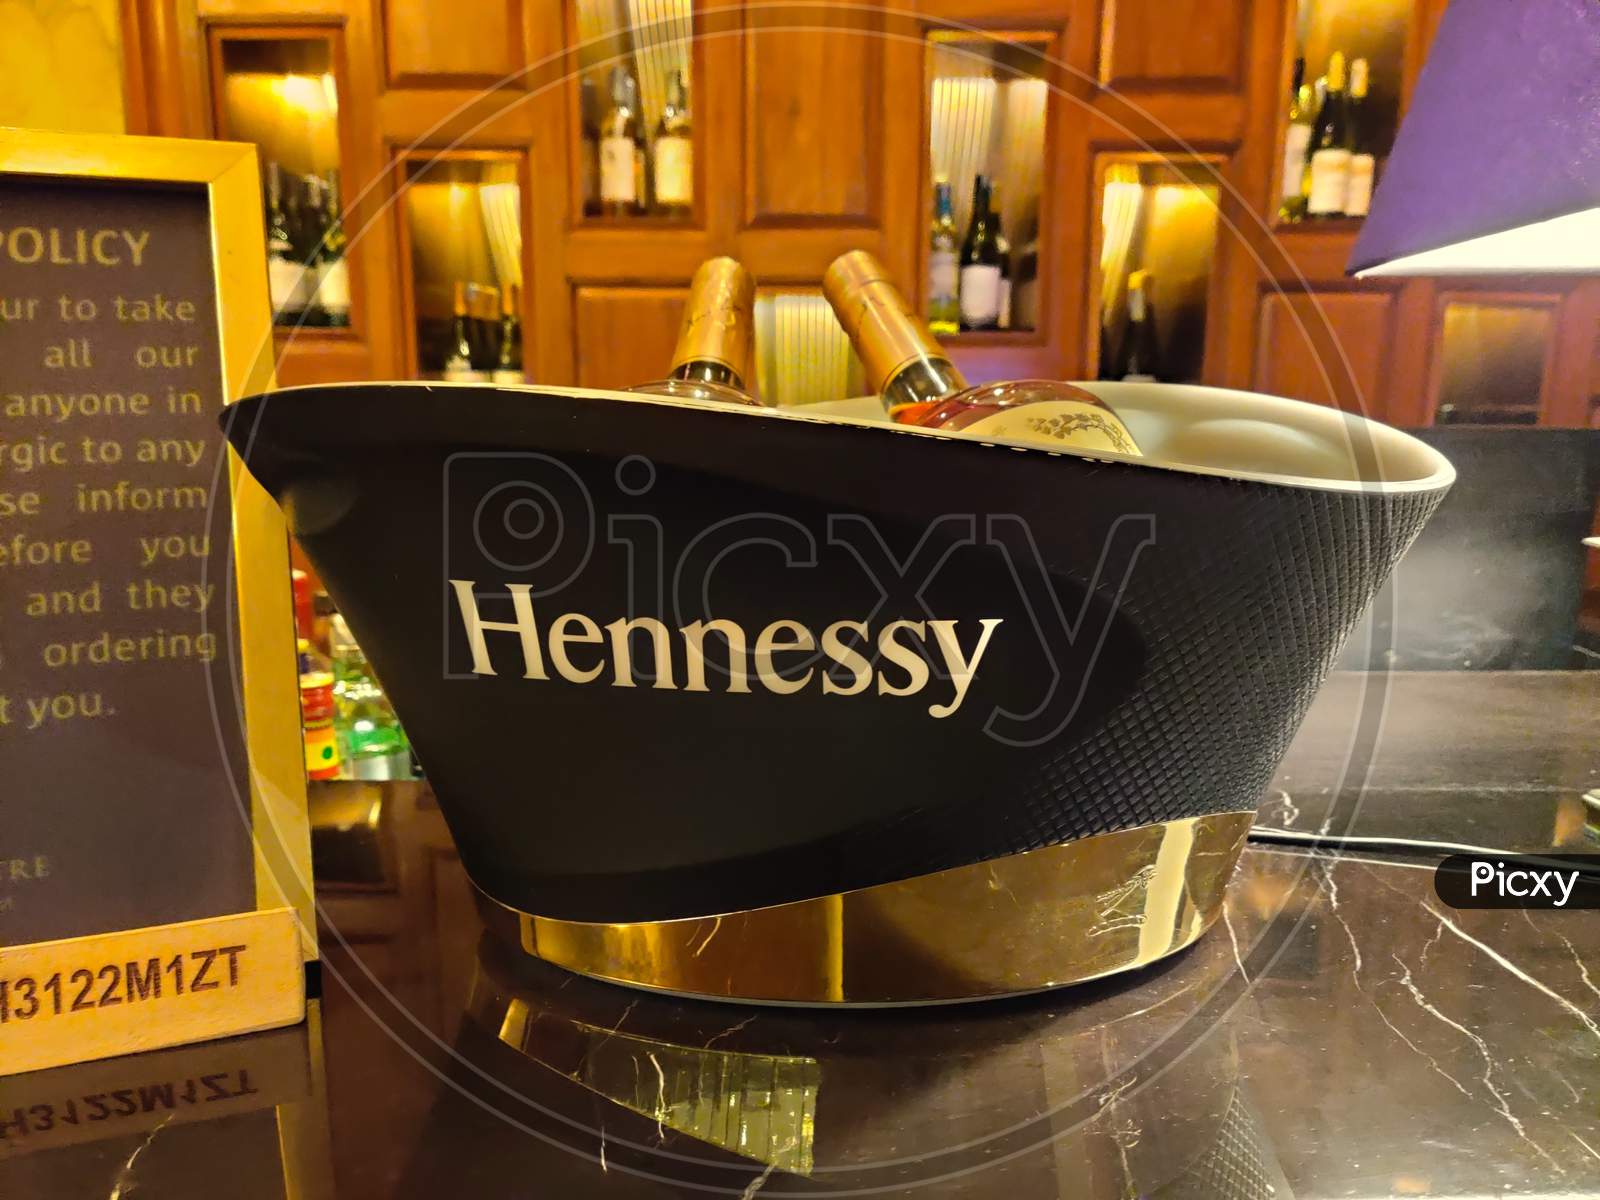 Photograph Of A Case Of Hennessy Wiskey Case On A Ornate Table